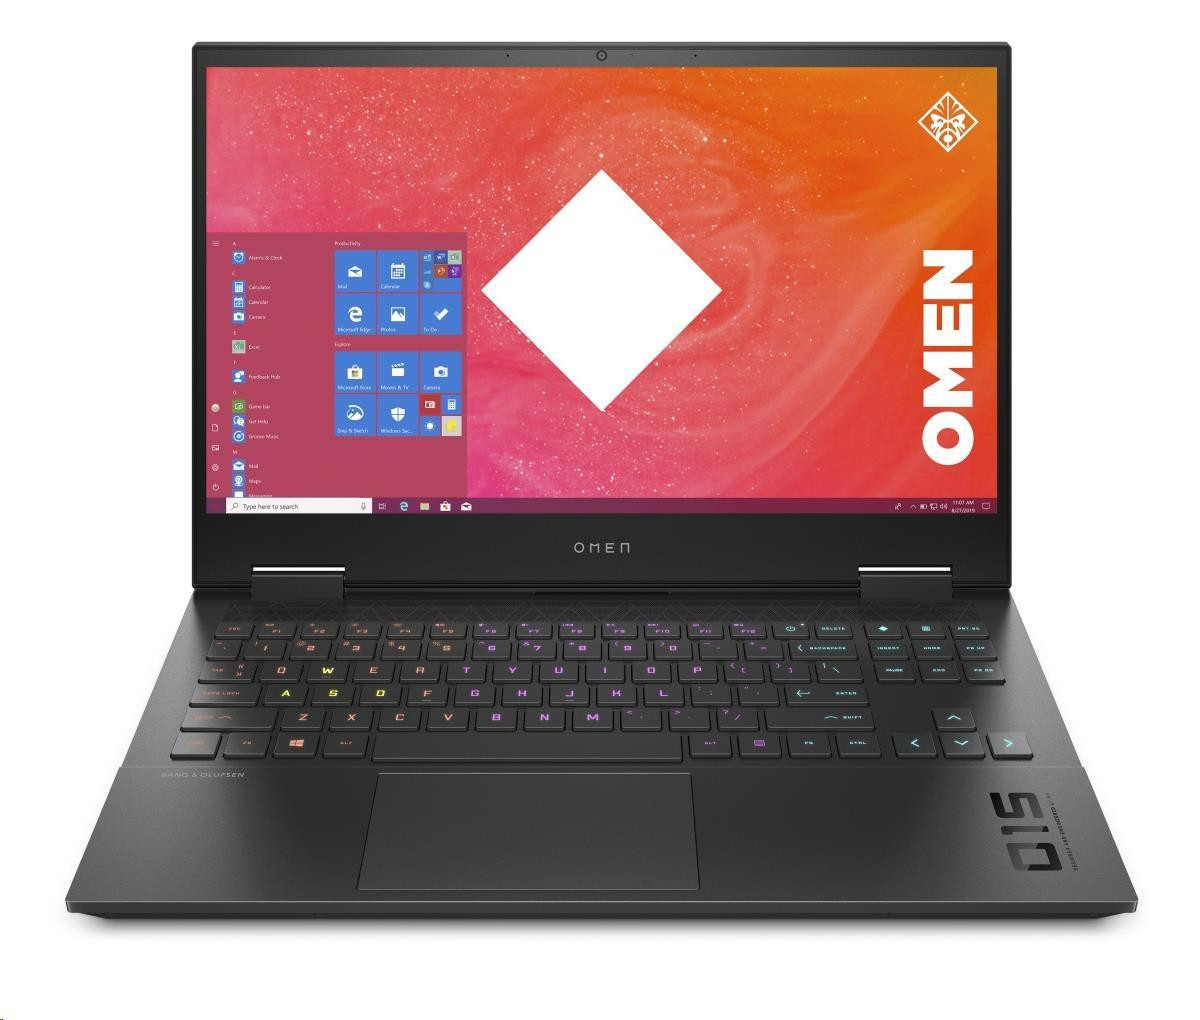 HP NTB OMEN 15-ek1002nc, i7 10870H, 15.6 FHD AG IPS 144Hz, 16GB DDR4, 1TB SSD, GeForce RTX 3070 8GB, Win10 Home, ON-SITE